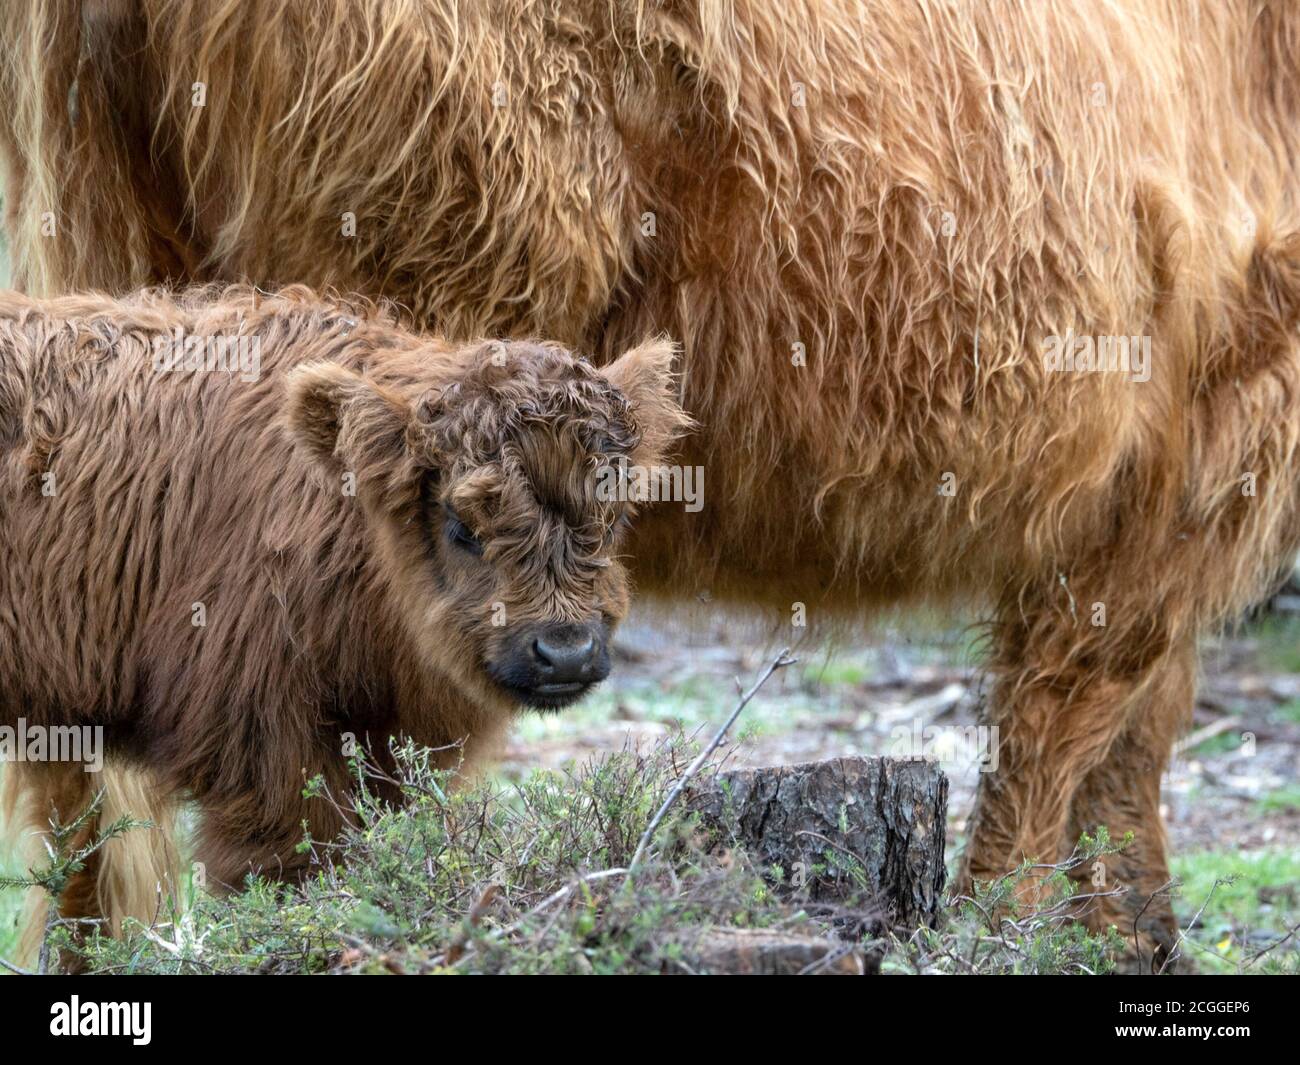 baby Highlander scotland hairy cow with mother in forest Stock Photo